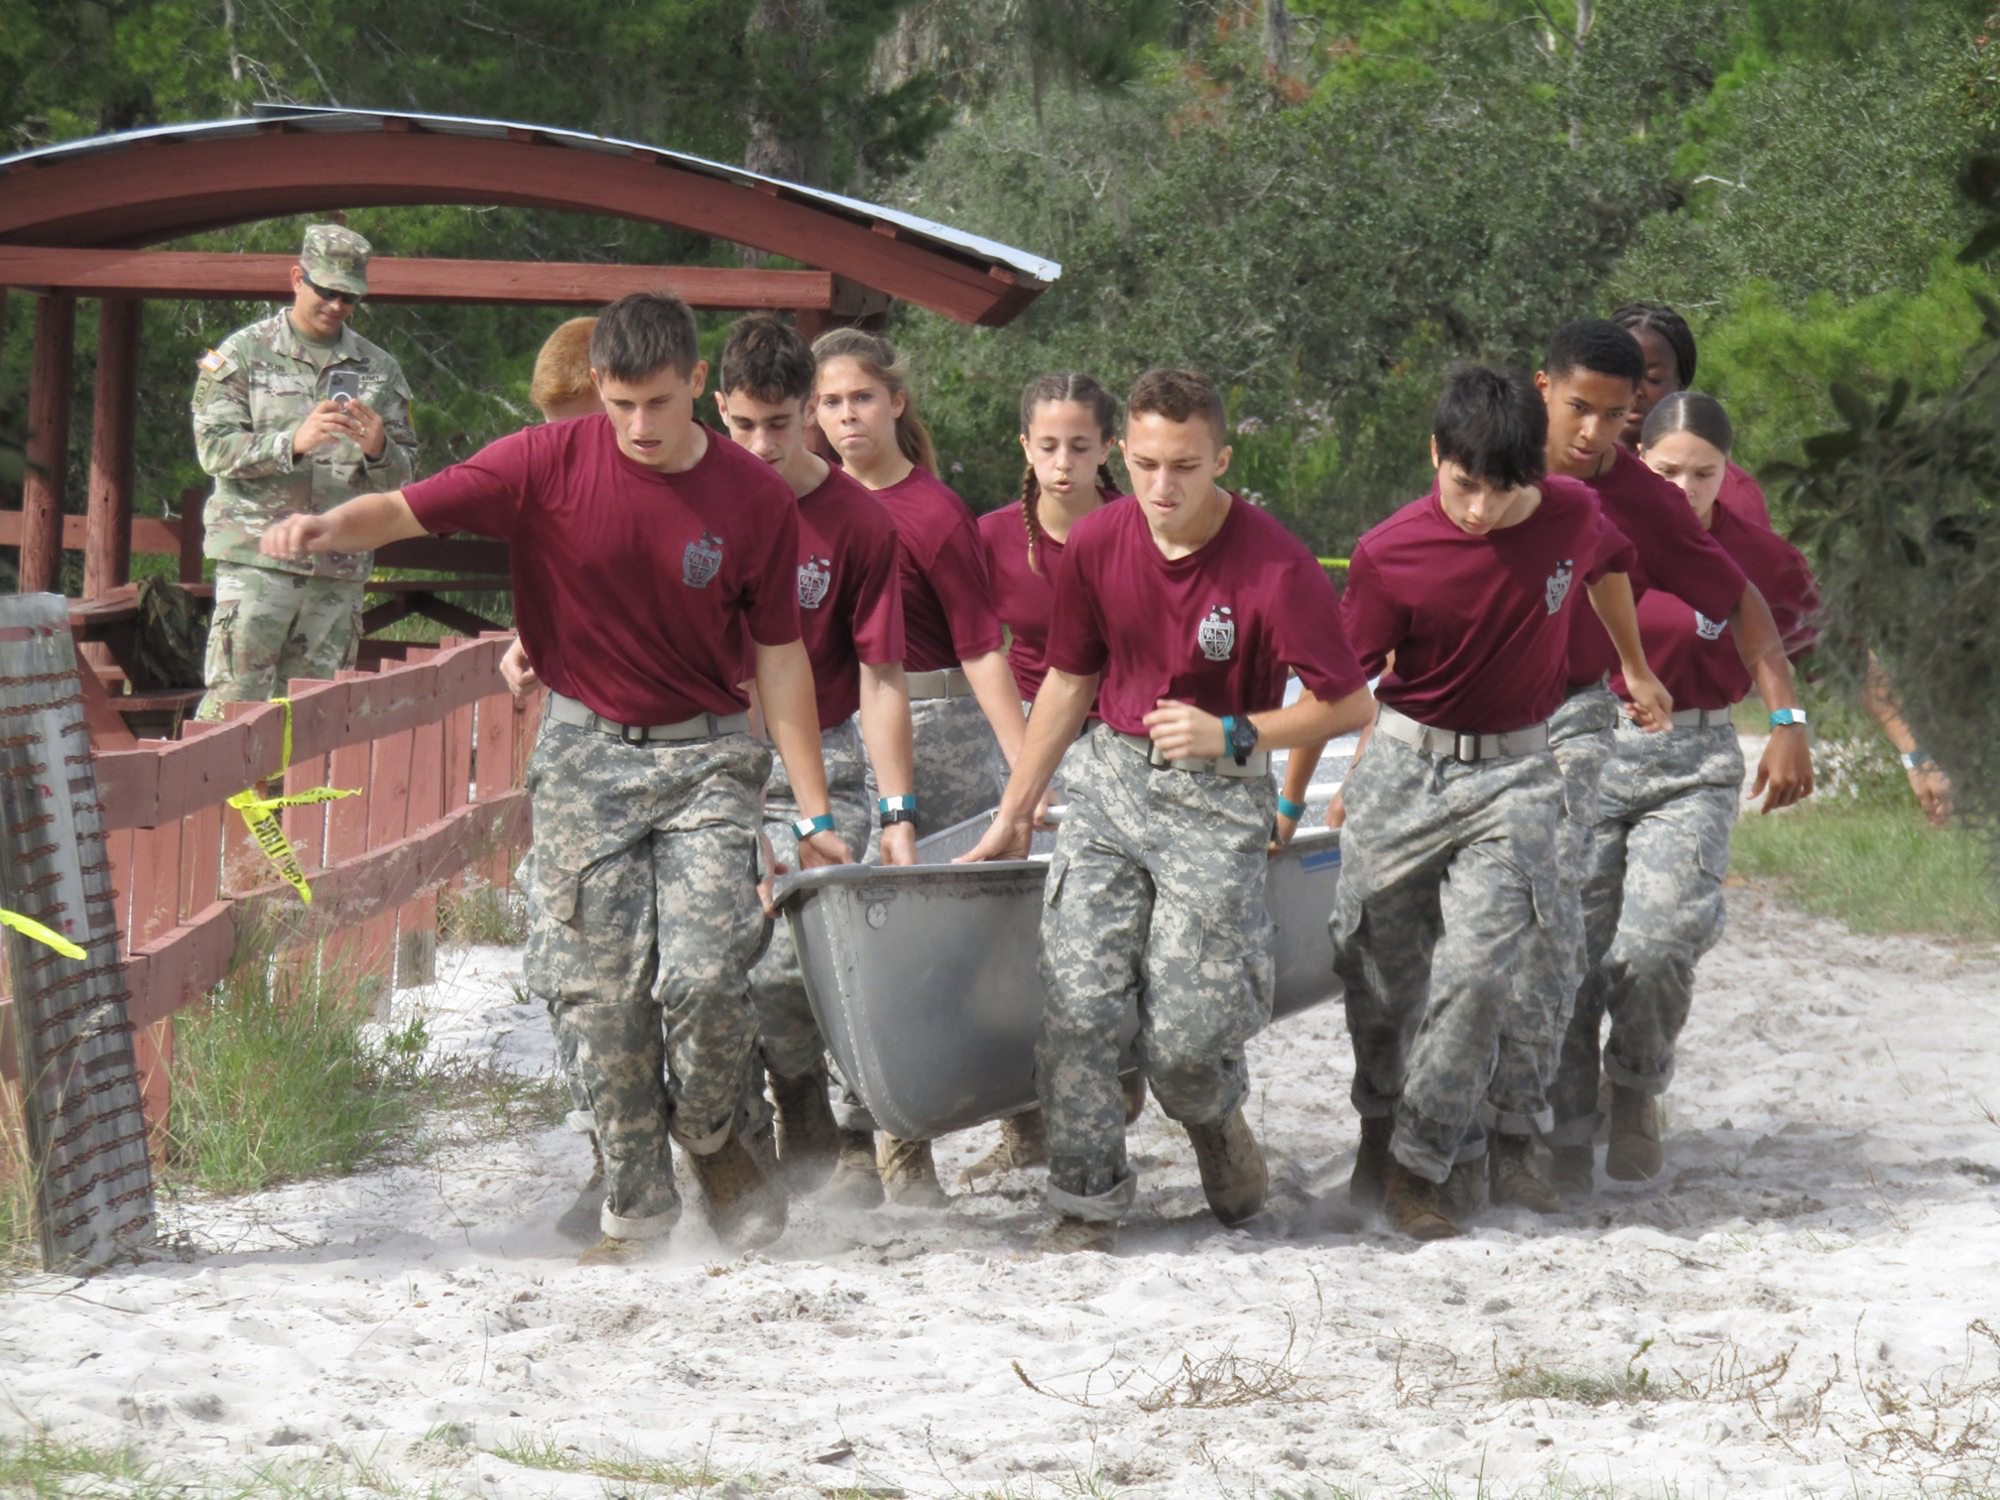 Members of the Braden River High School JROTC Raiders team compete in the obstacle course at the state competition. Courtesy photo.